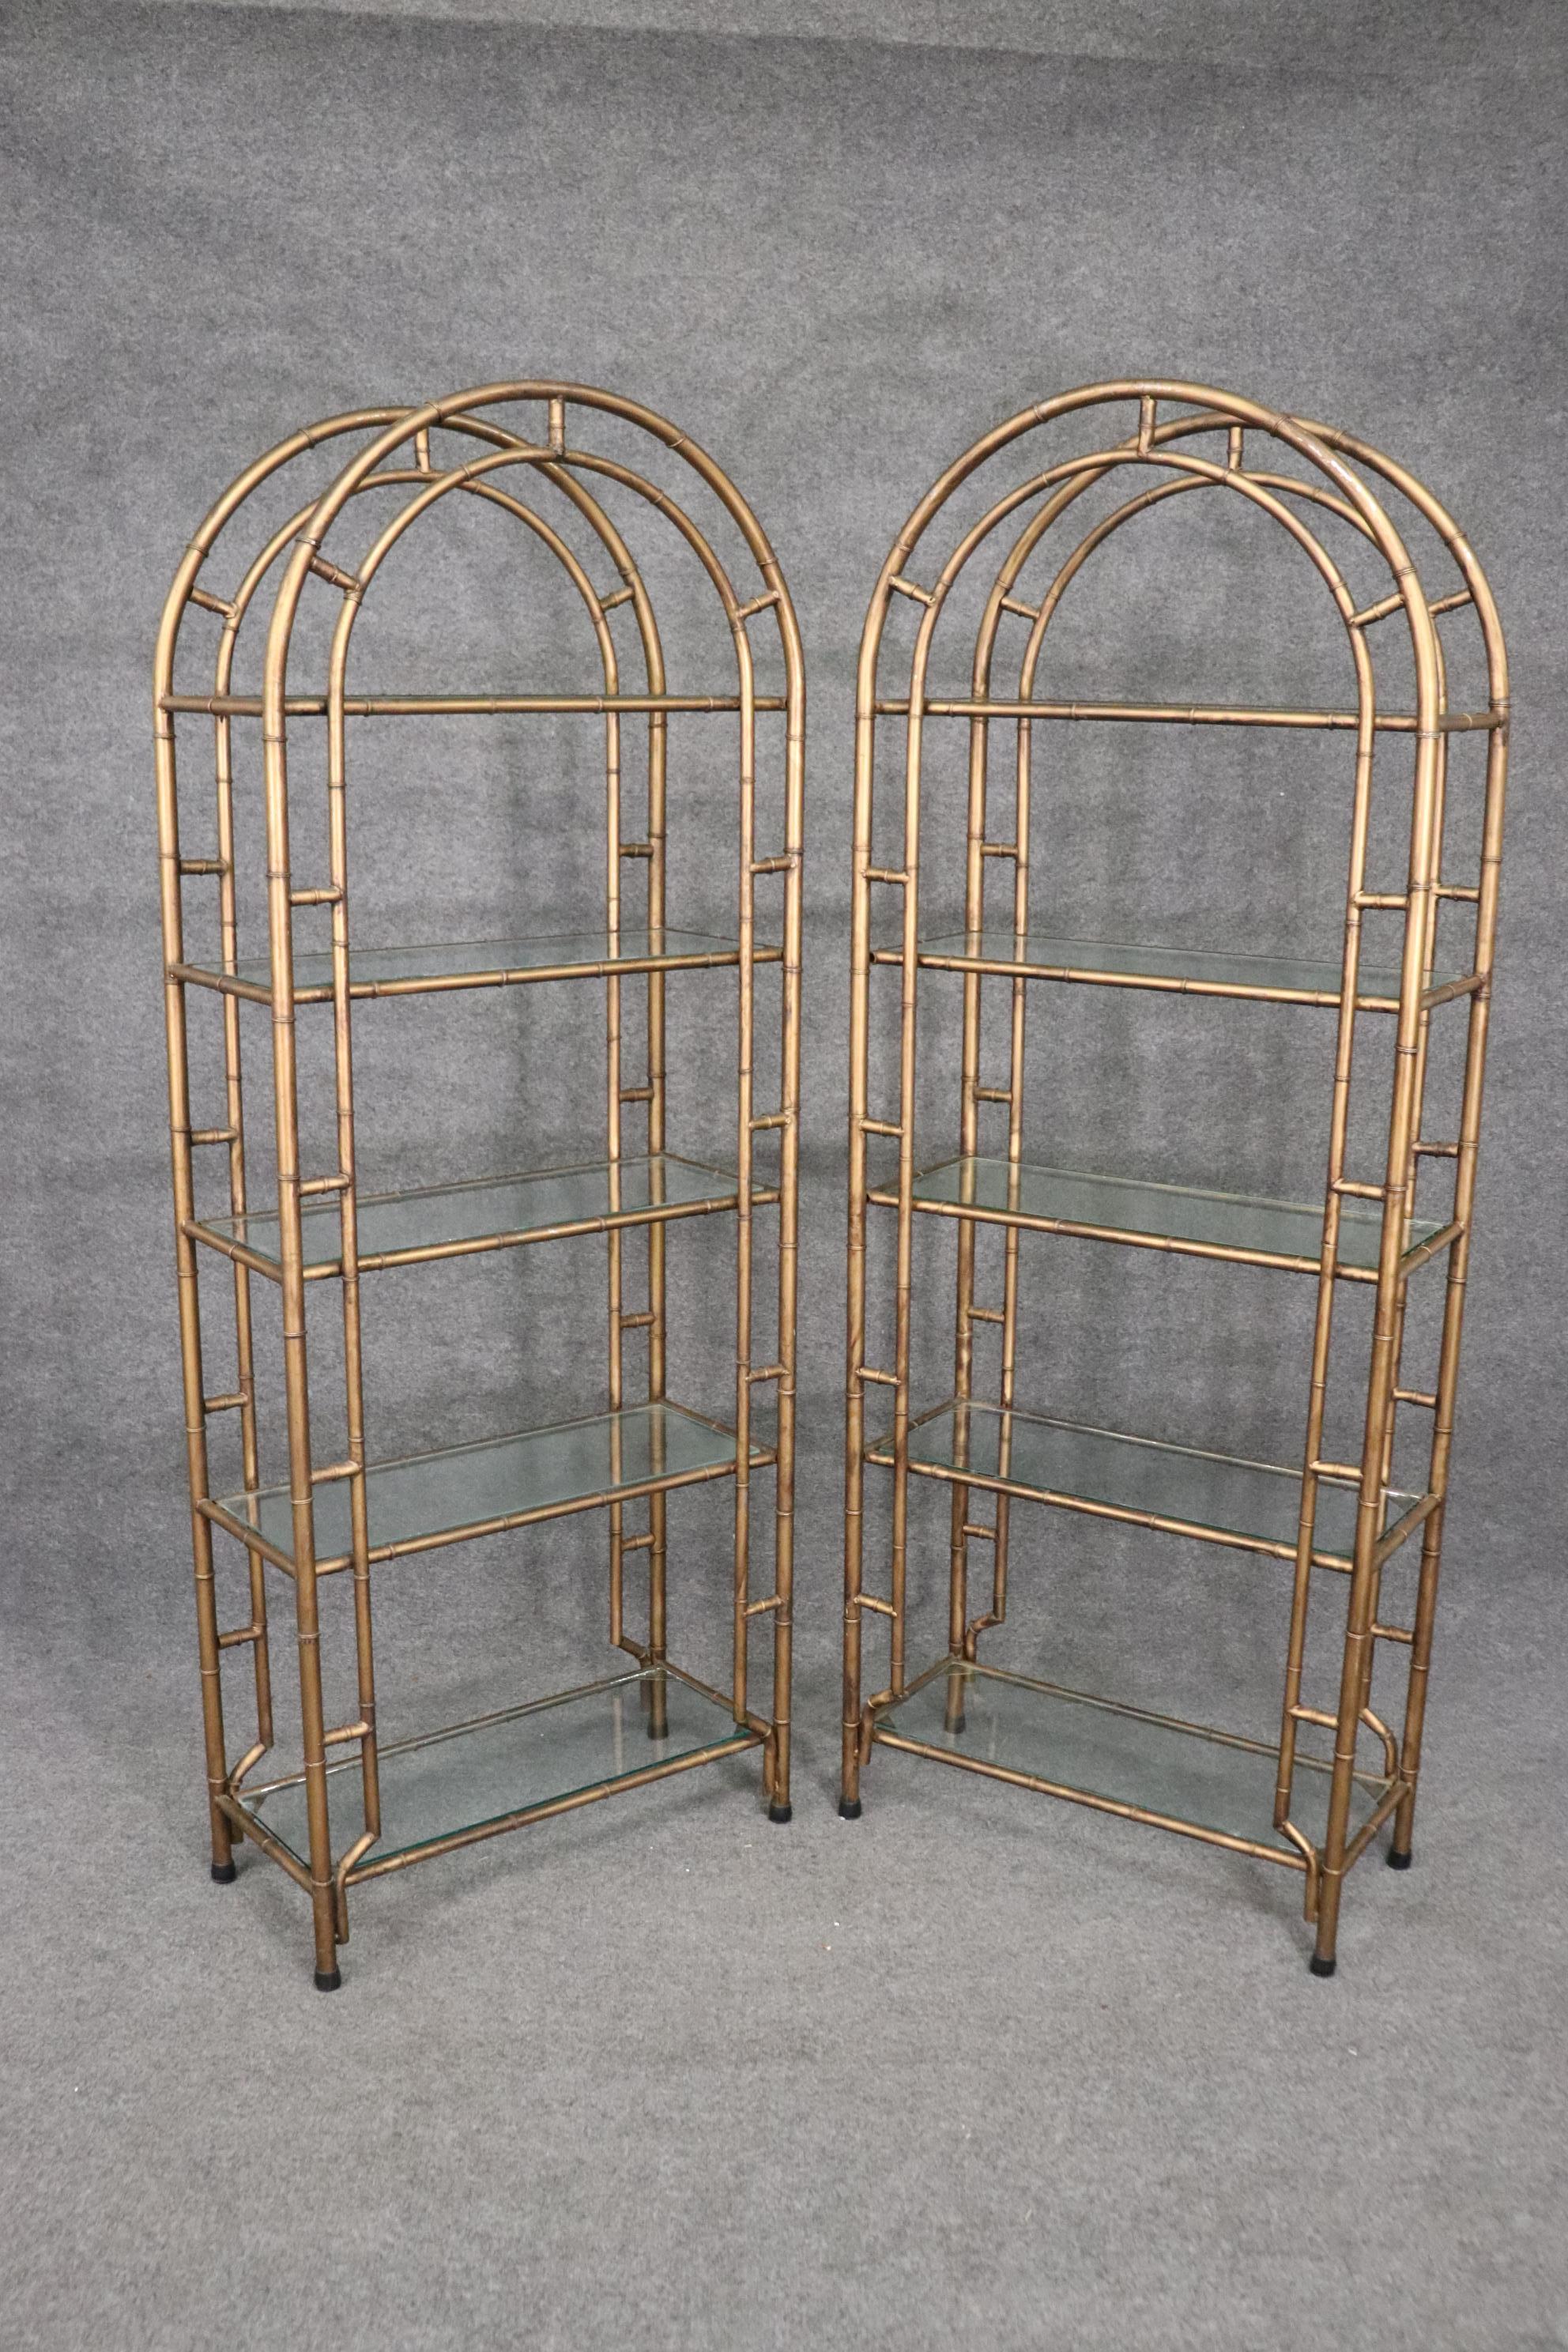 This is a beautiful and rare pair of gilded etageres in the Hollywood regency style. They are in good condition and measure 79 tall x 30 wide x 14 deep.